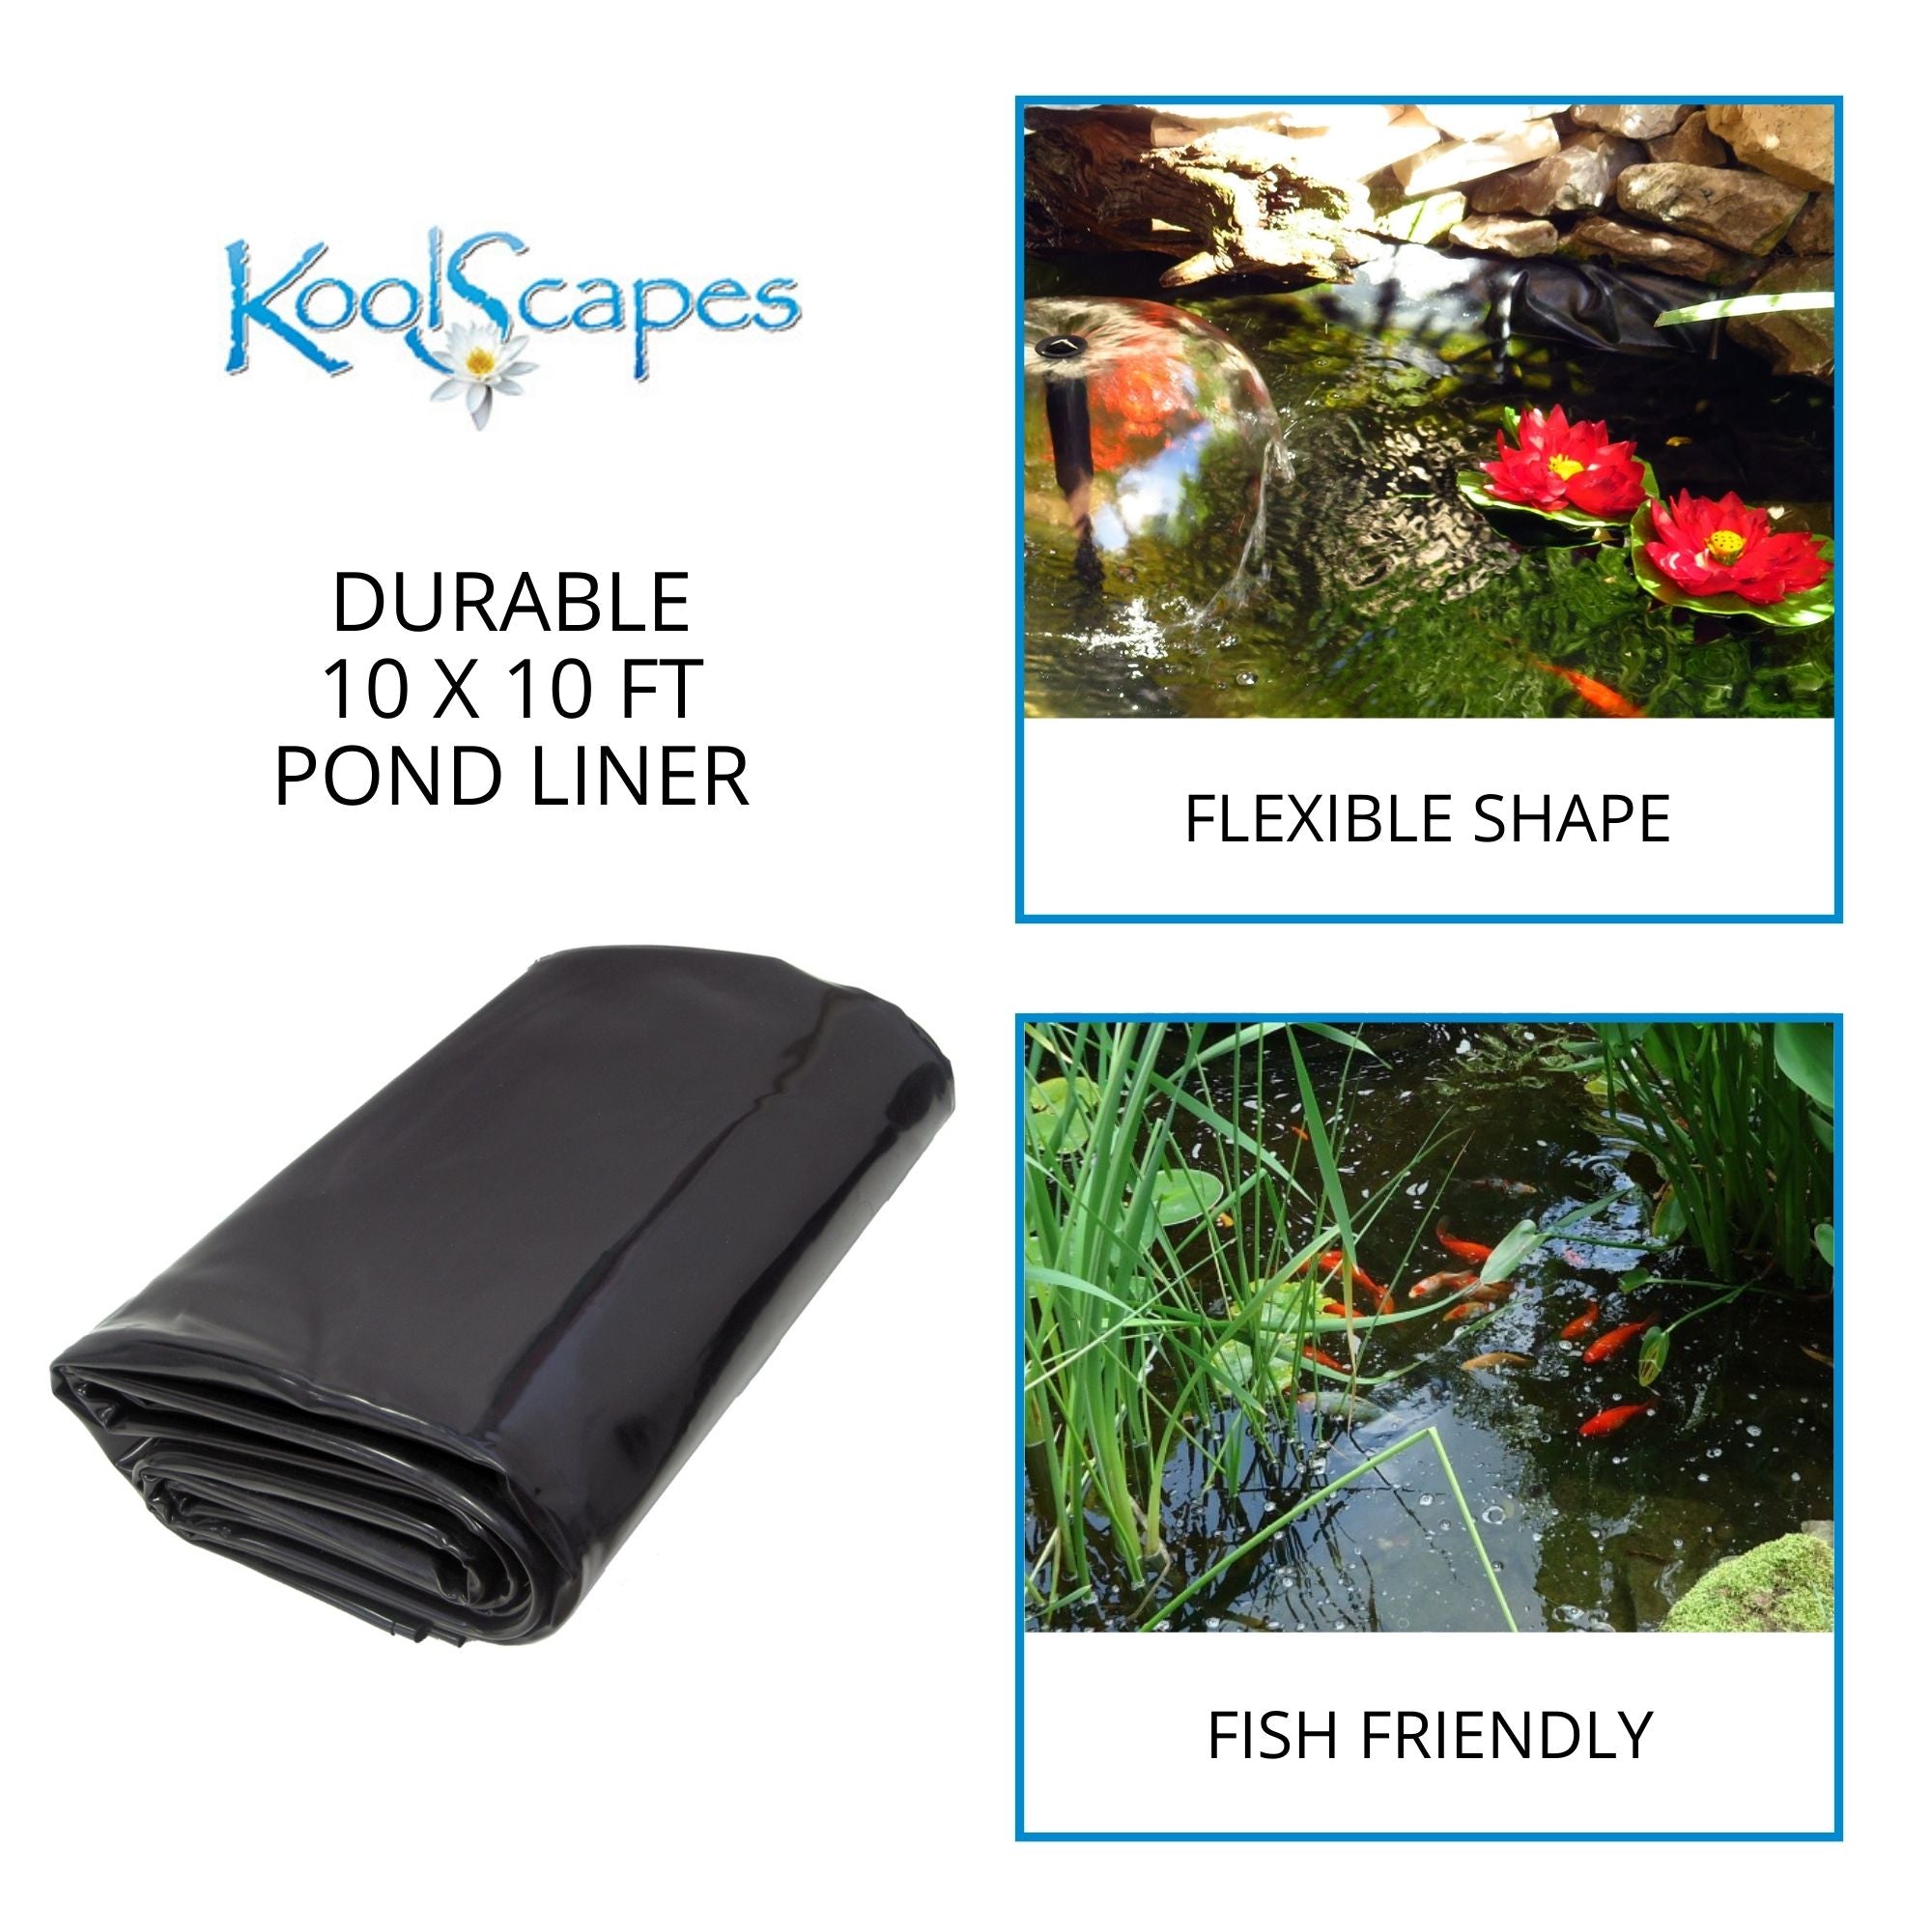 On the left is a product shot of the folded one-piece pond liner on a white background with text above reading, "Koolscapes durable 10 x 10 ft pond liner." On the right are two lifestyle images: Top shows the surface of a small pond with two artificial floating water lilies and a water bell fountain, labeled, "flexible shape." Bottom shows the surface of a small pond with a school of small orange koi swimming among plants, labeled, "fish friendly" 